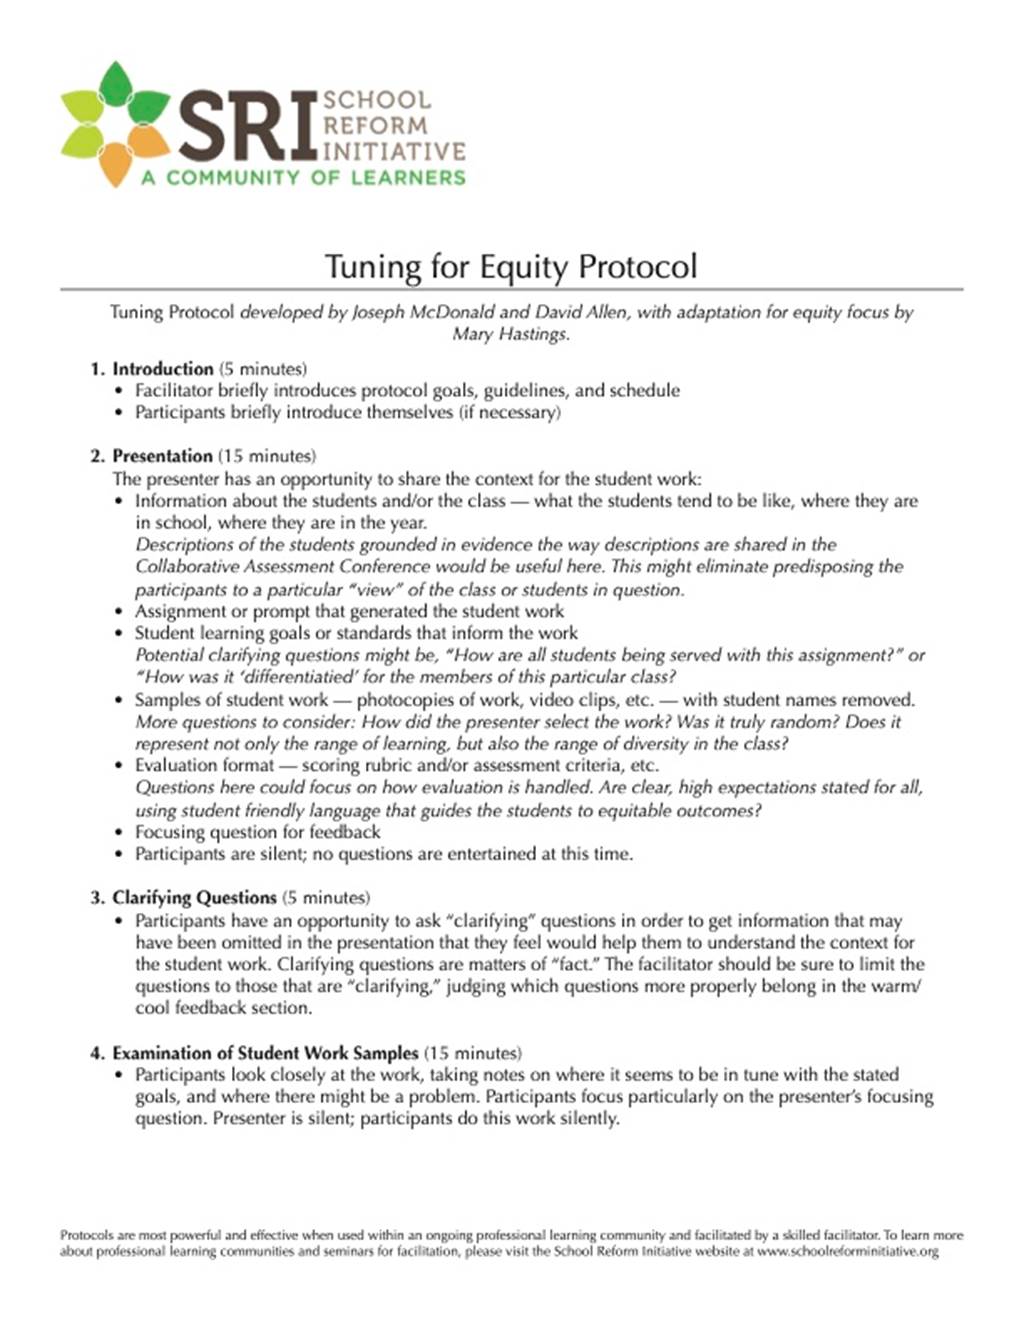 Tuning for Equity Protocol - Document images